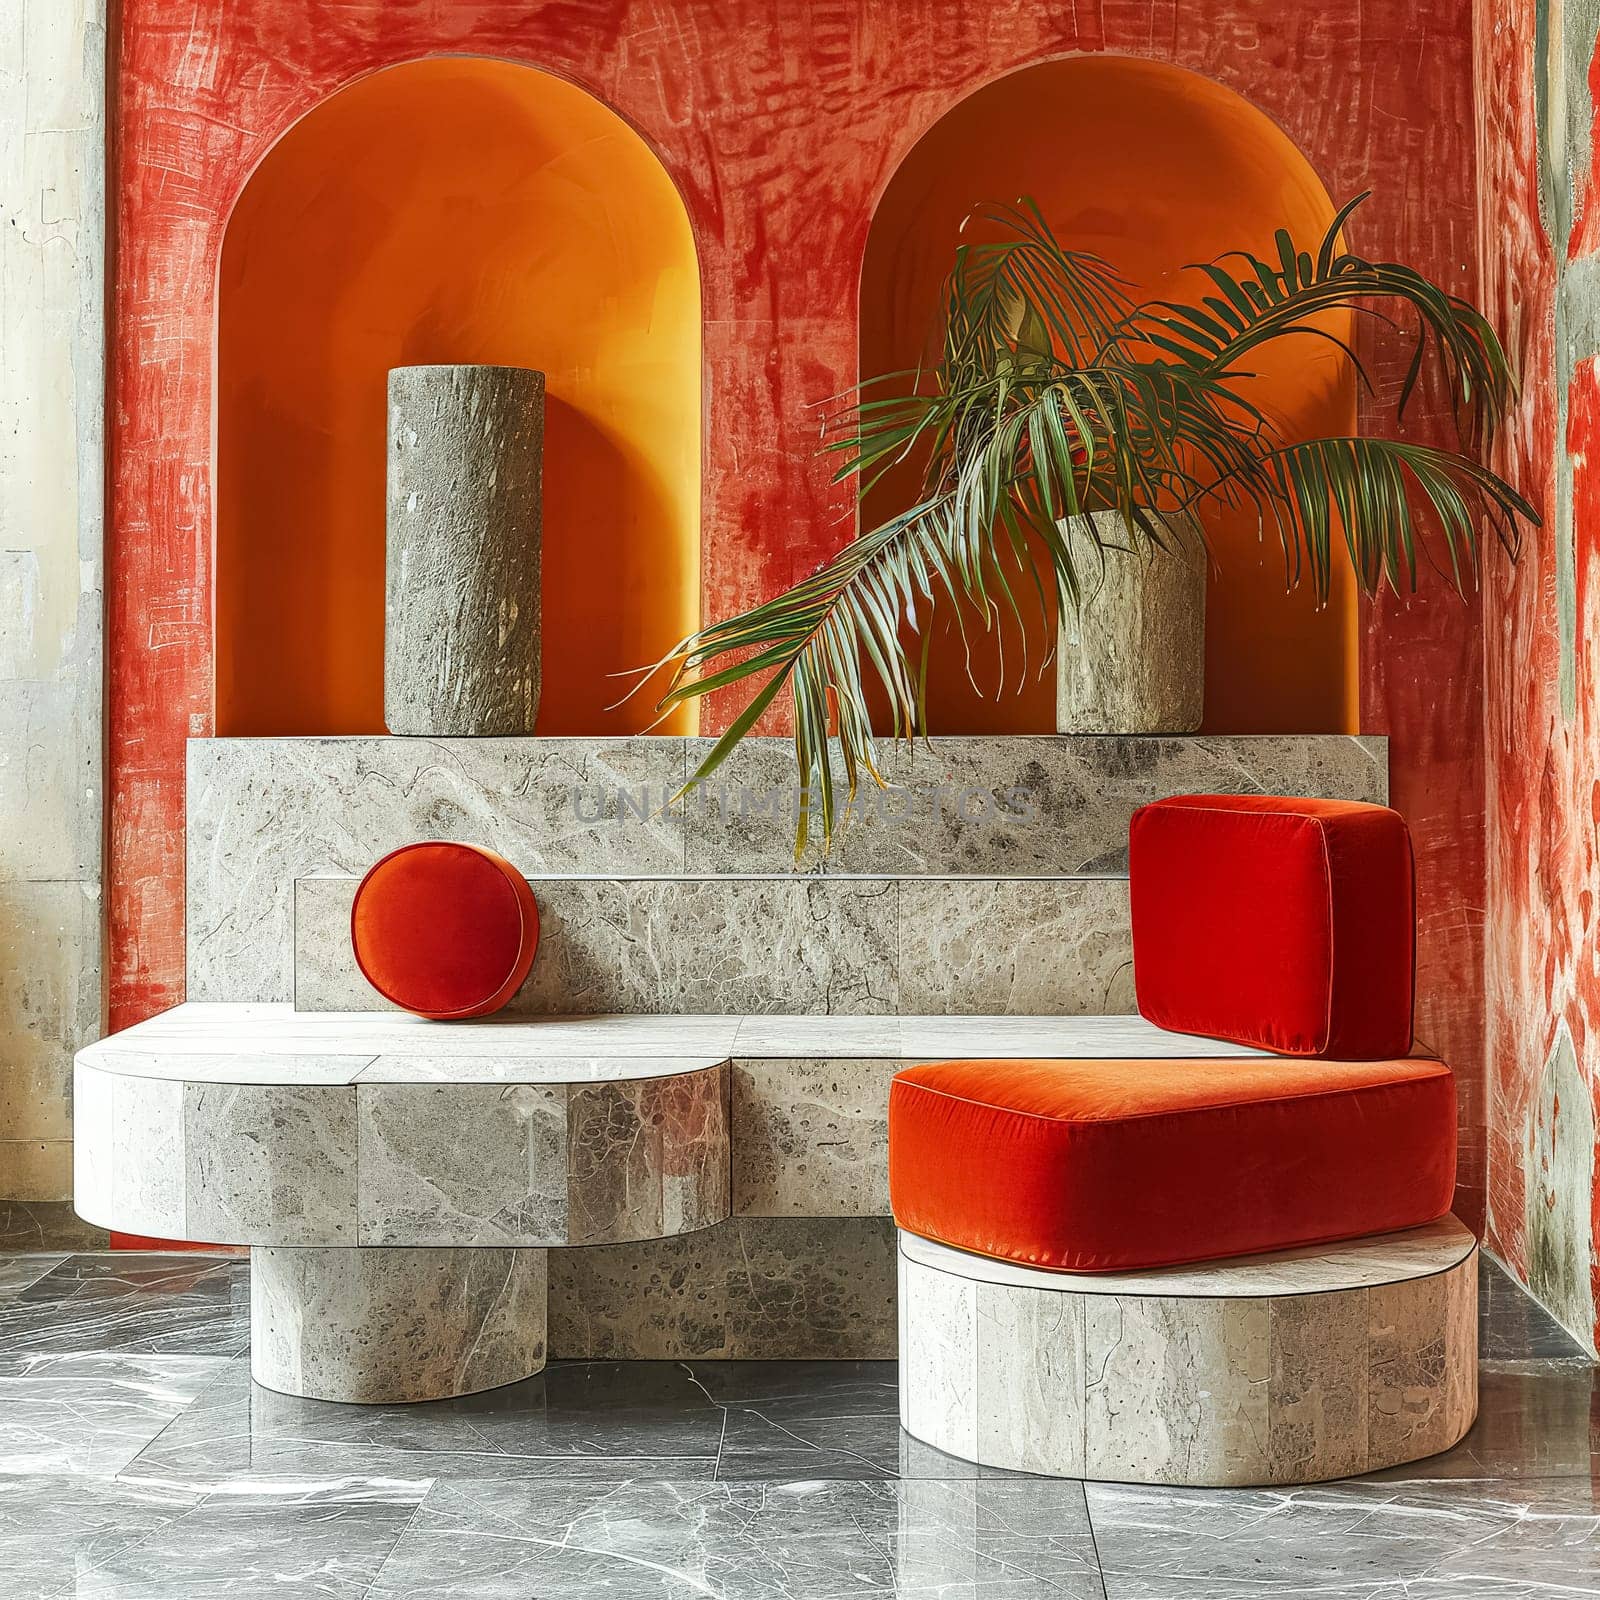 A red and orange room with a white marble wall and a red couch. The couch is made of red velvet and has a round pillow on it. There are two vases on the couch, one of which is taller